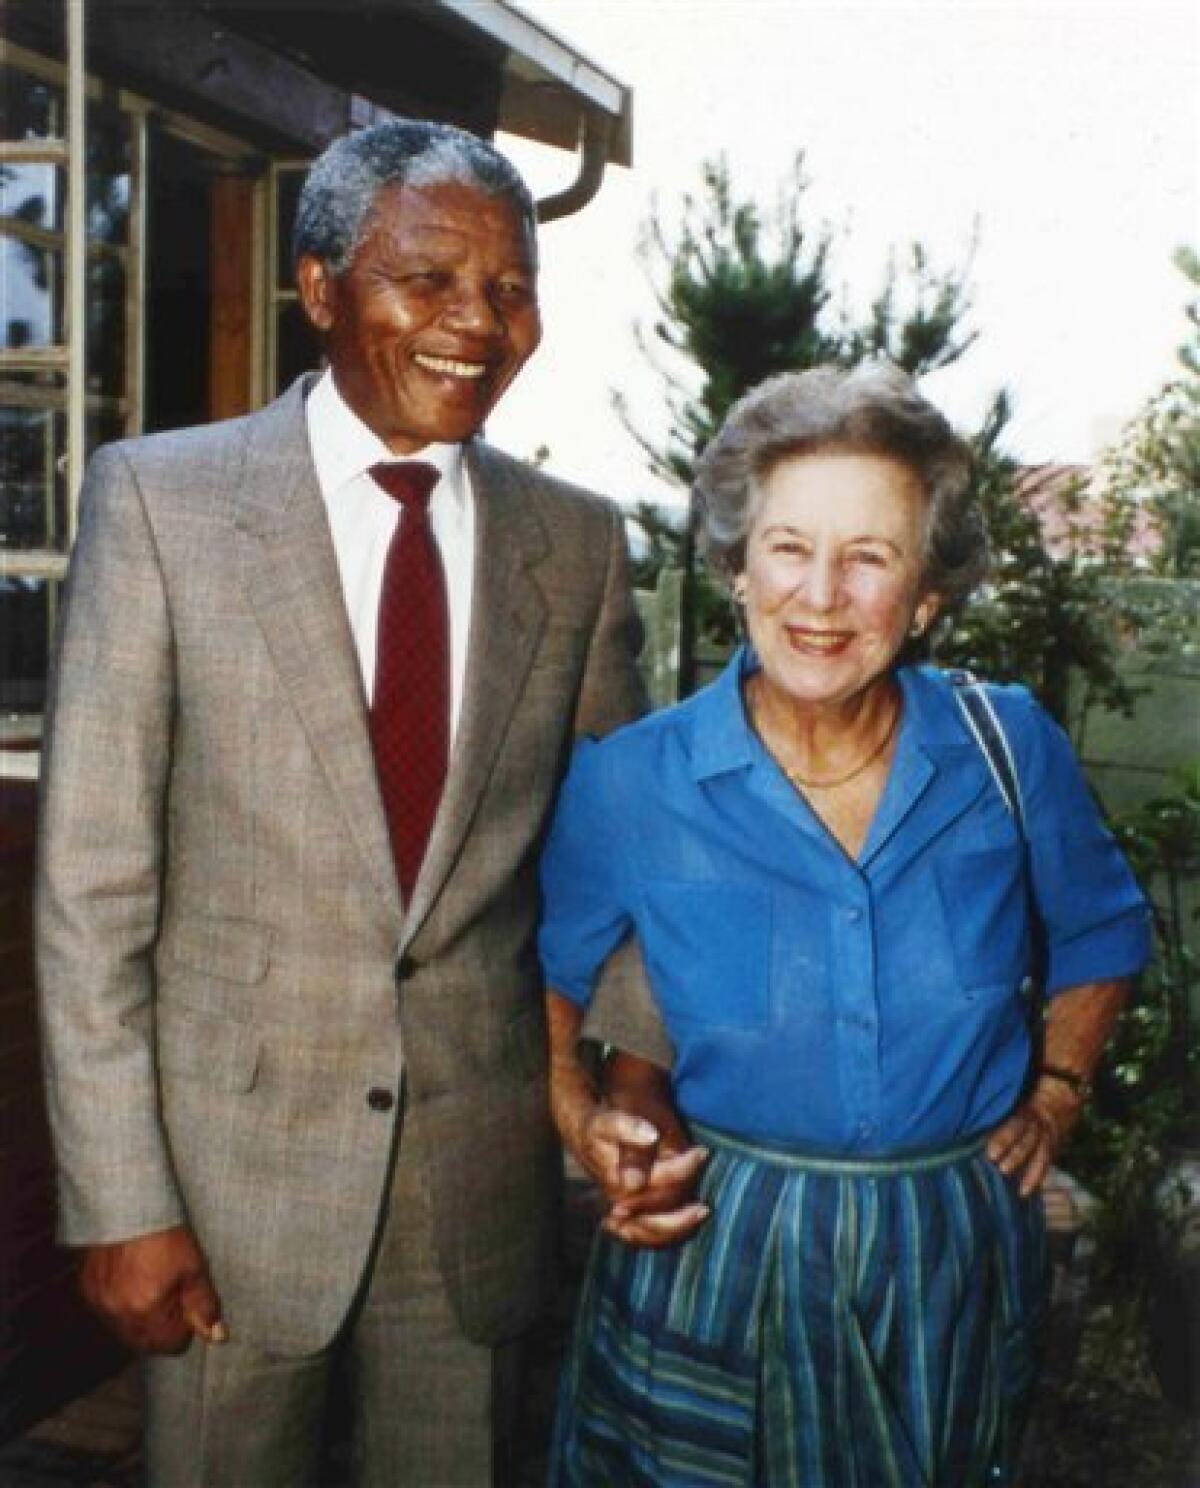 In this Feb. 26, 1990 file photo veteran anti-apartheid activist Helen Suzman, right, holds hands with Nelson Mandela, when Suzman visited Mandela at his Soweto, South Africa, home. The Nelson Mandela Foundation said Thursday, Jan. 1, 2009, that South African anti-apartheid activist Helen Suzman has died. She was 91. Foundation chief executive Achmat Dangor says Suzman was a "great patriot and a fearless fighter against apartheid." The cause of death was not immediately available Thursday. Suzman, who was white, was one of the few lawmakers who protested against white racist rule. She visited Mandela, the head of the then banned African National Congress, in prison in 1967 and became well-known for her campaigns against the injustices of apartheid. (AP Photo/John Parkin/file)